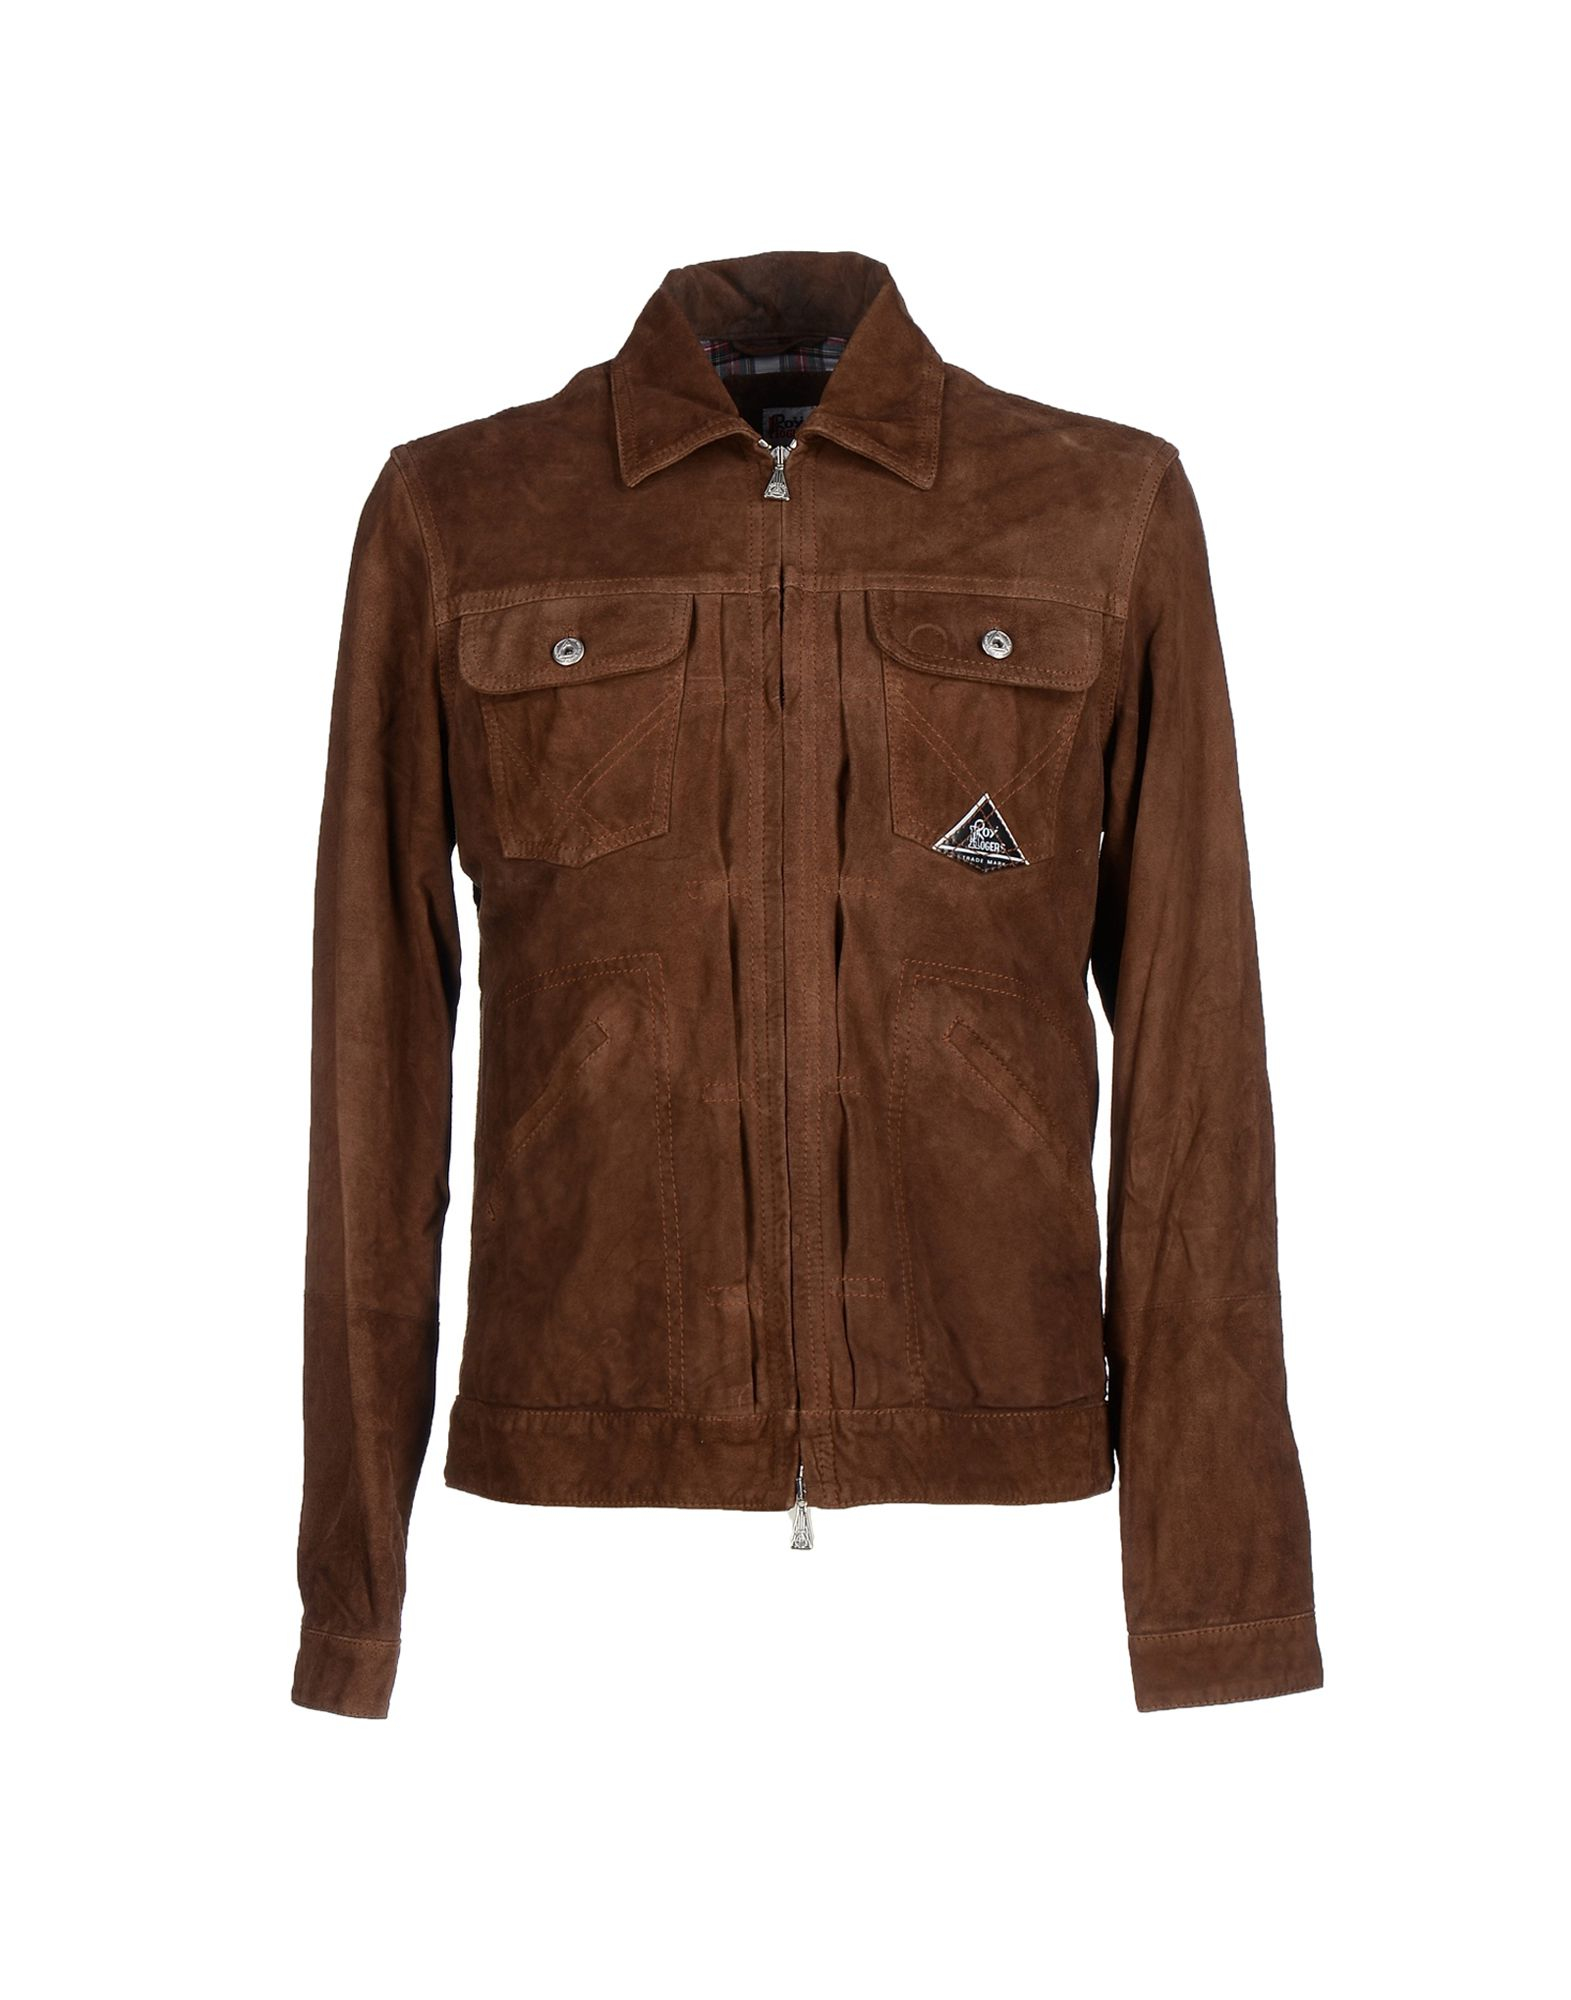 Roy Rogers Jacket in Brown for Men - Lyst